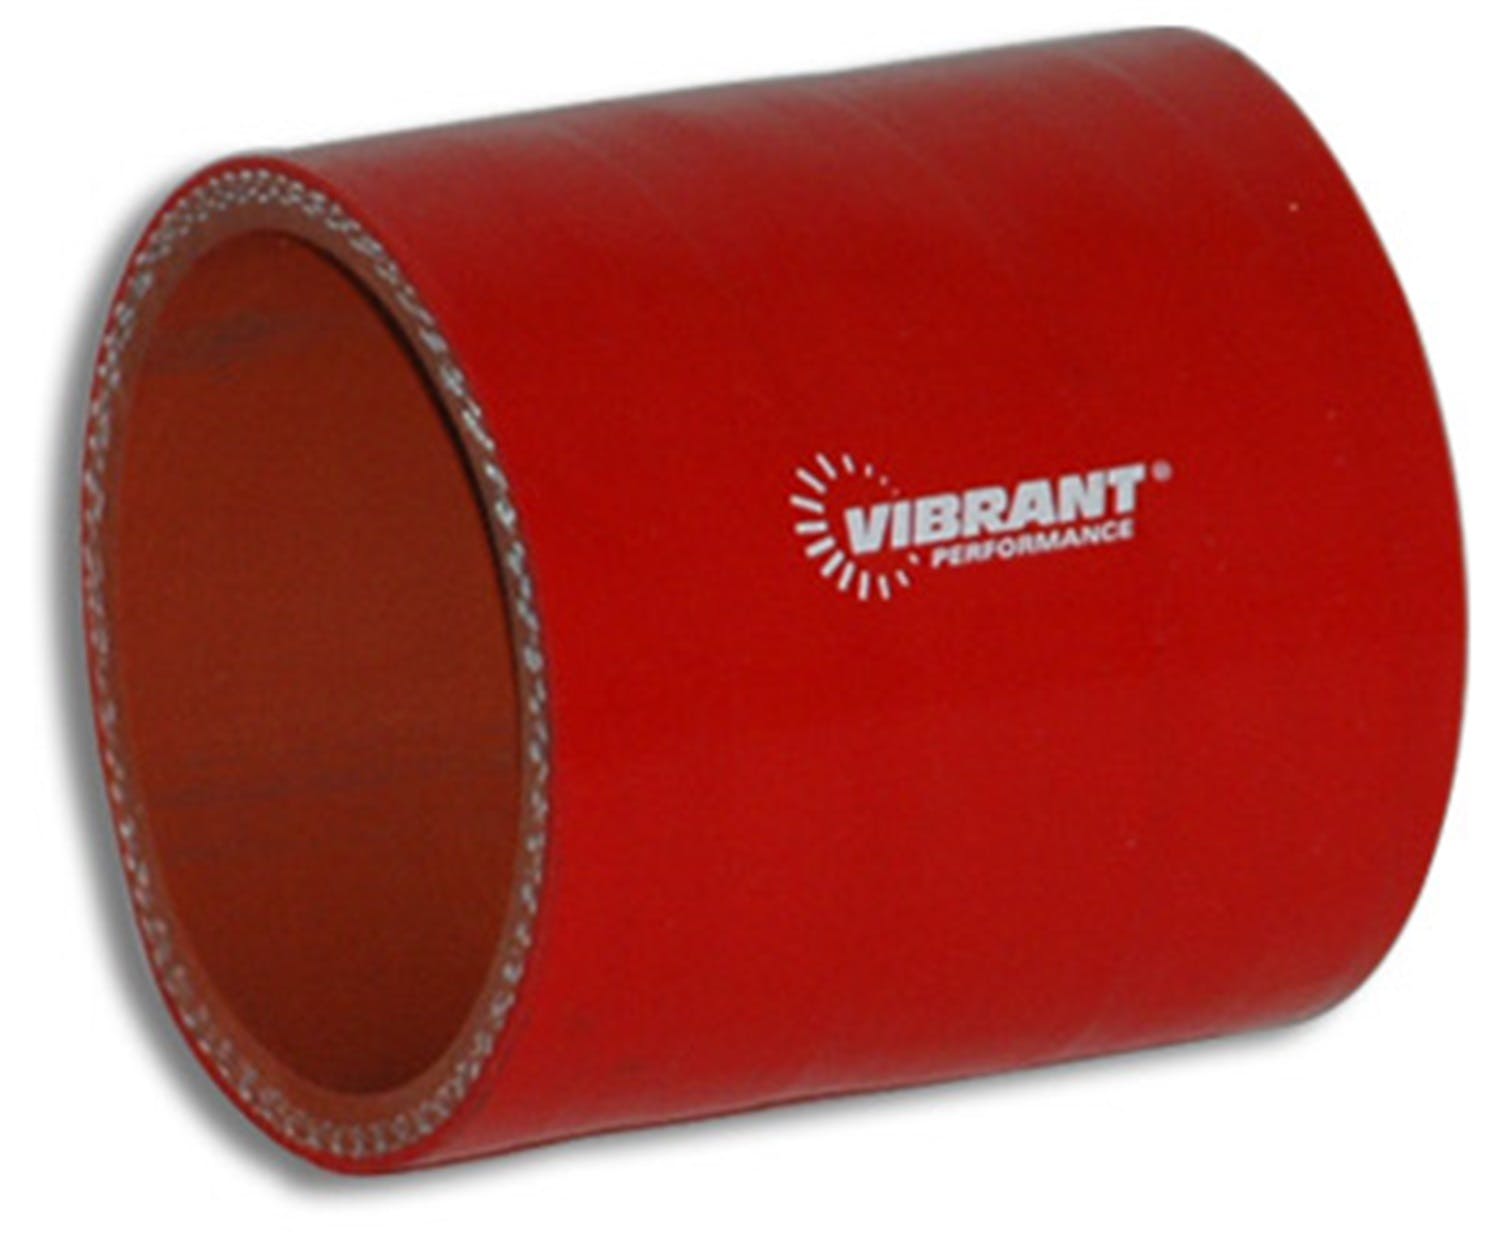 Vibrant Performance 2706R 4 Ply Silicone Sleeve, 2 inch I.D. x 3 inch Long - Red